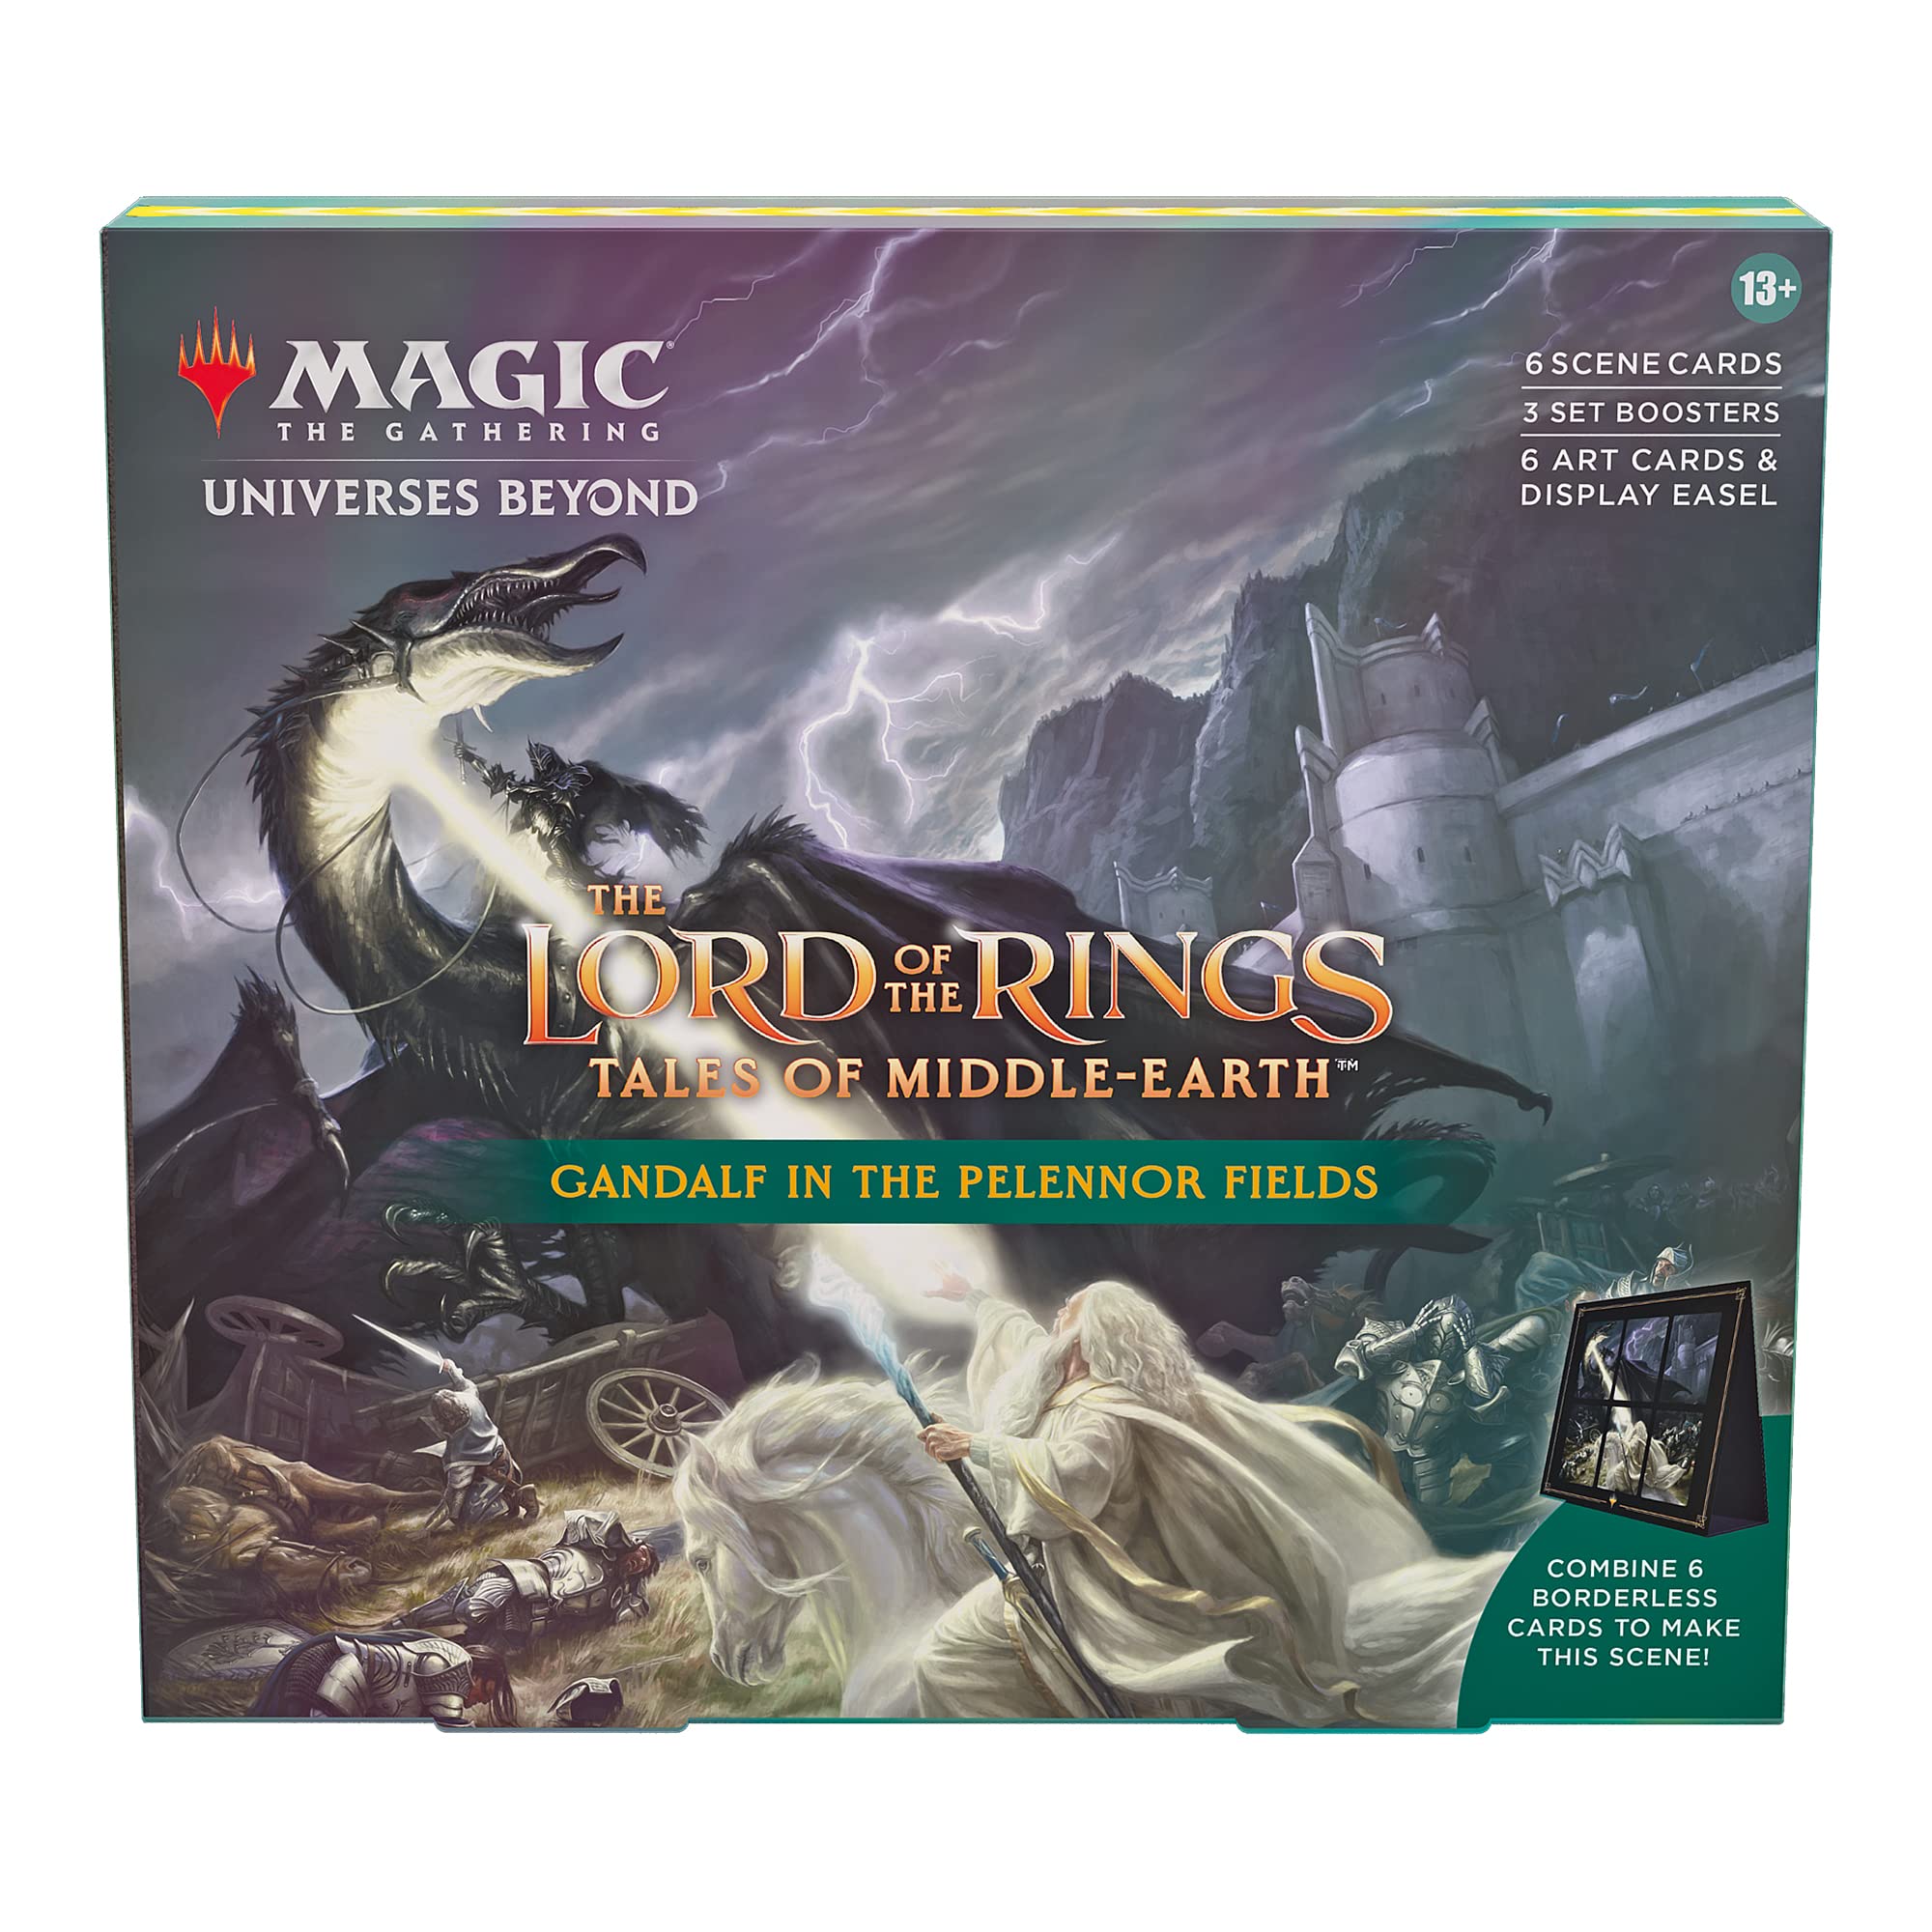 Magic The Gathering The Lord of The Rings: Tales of Middle-Earth Scene Box - Gandalf in Pelennor Fields (6 Scene Cards, 6 Art Cards, 3 Set Boosters + Display Easel)